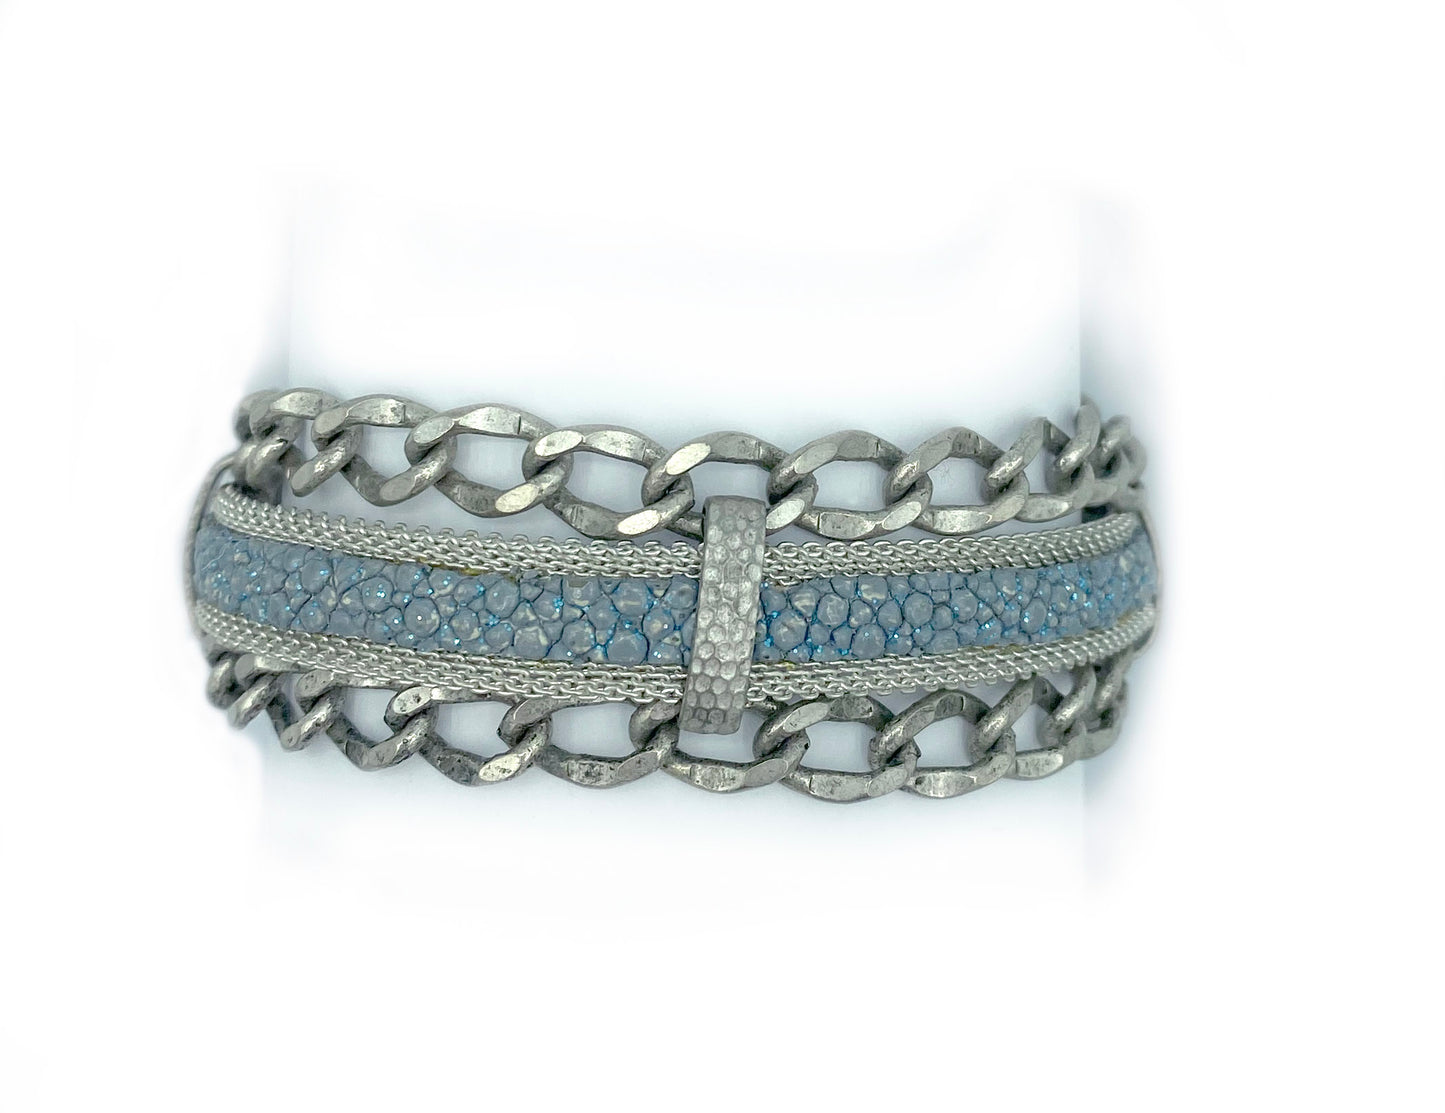 Shimmery Stingray Linked with Chains Cuff